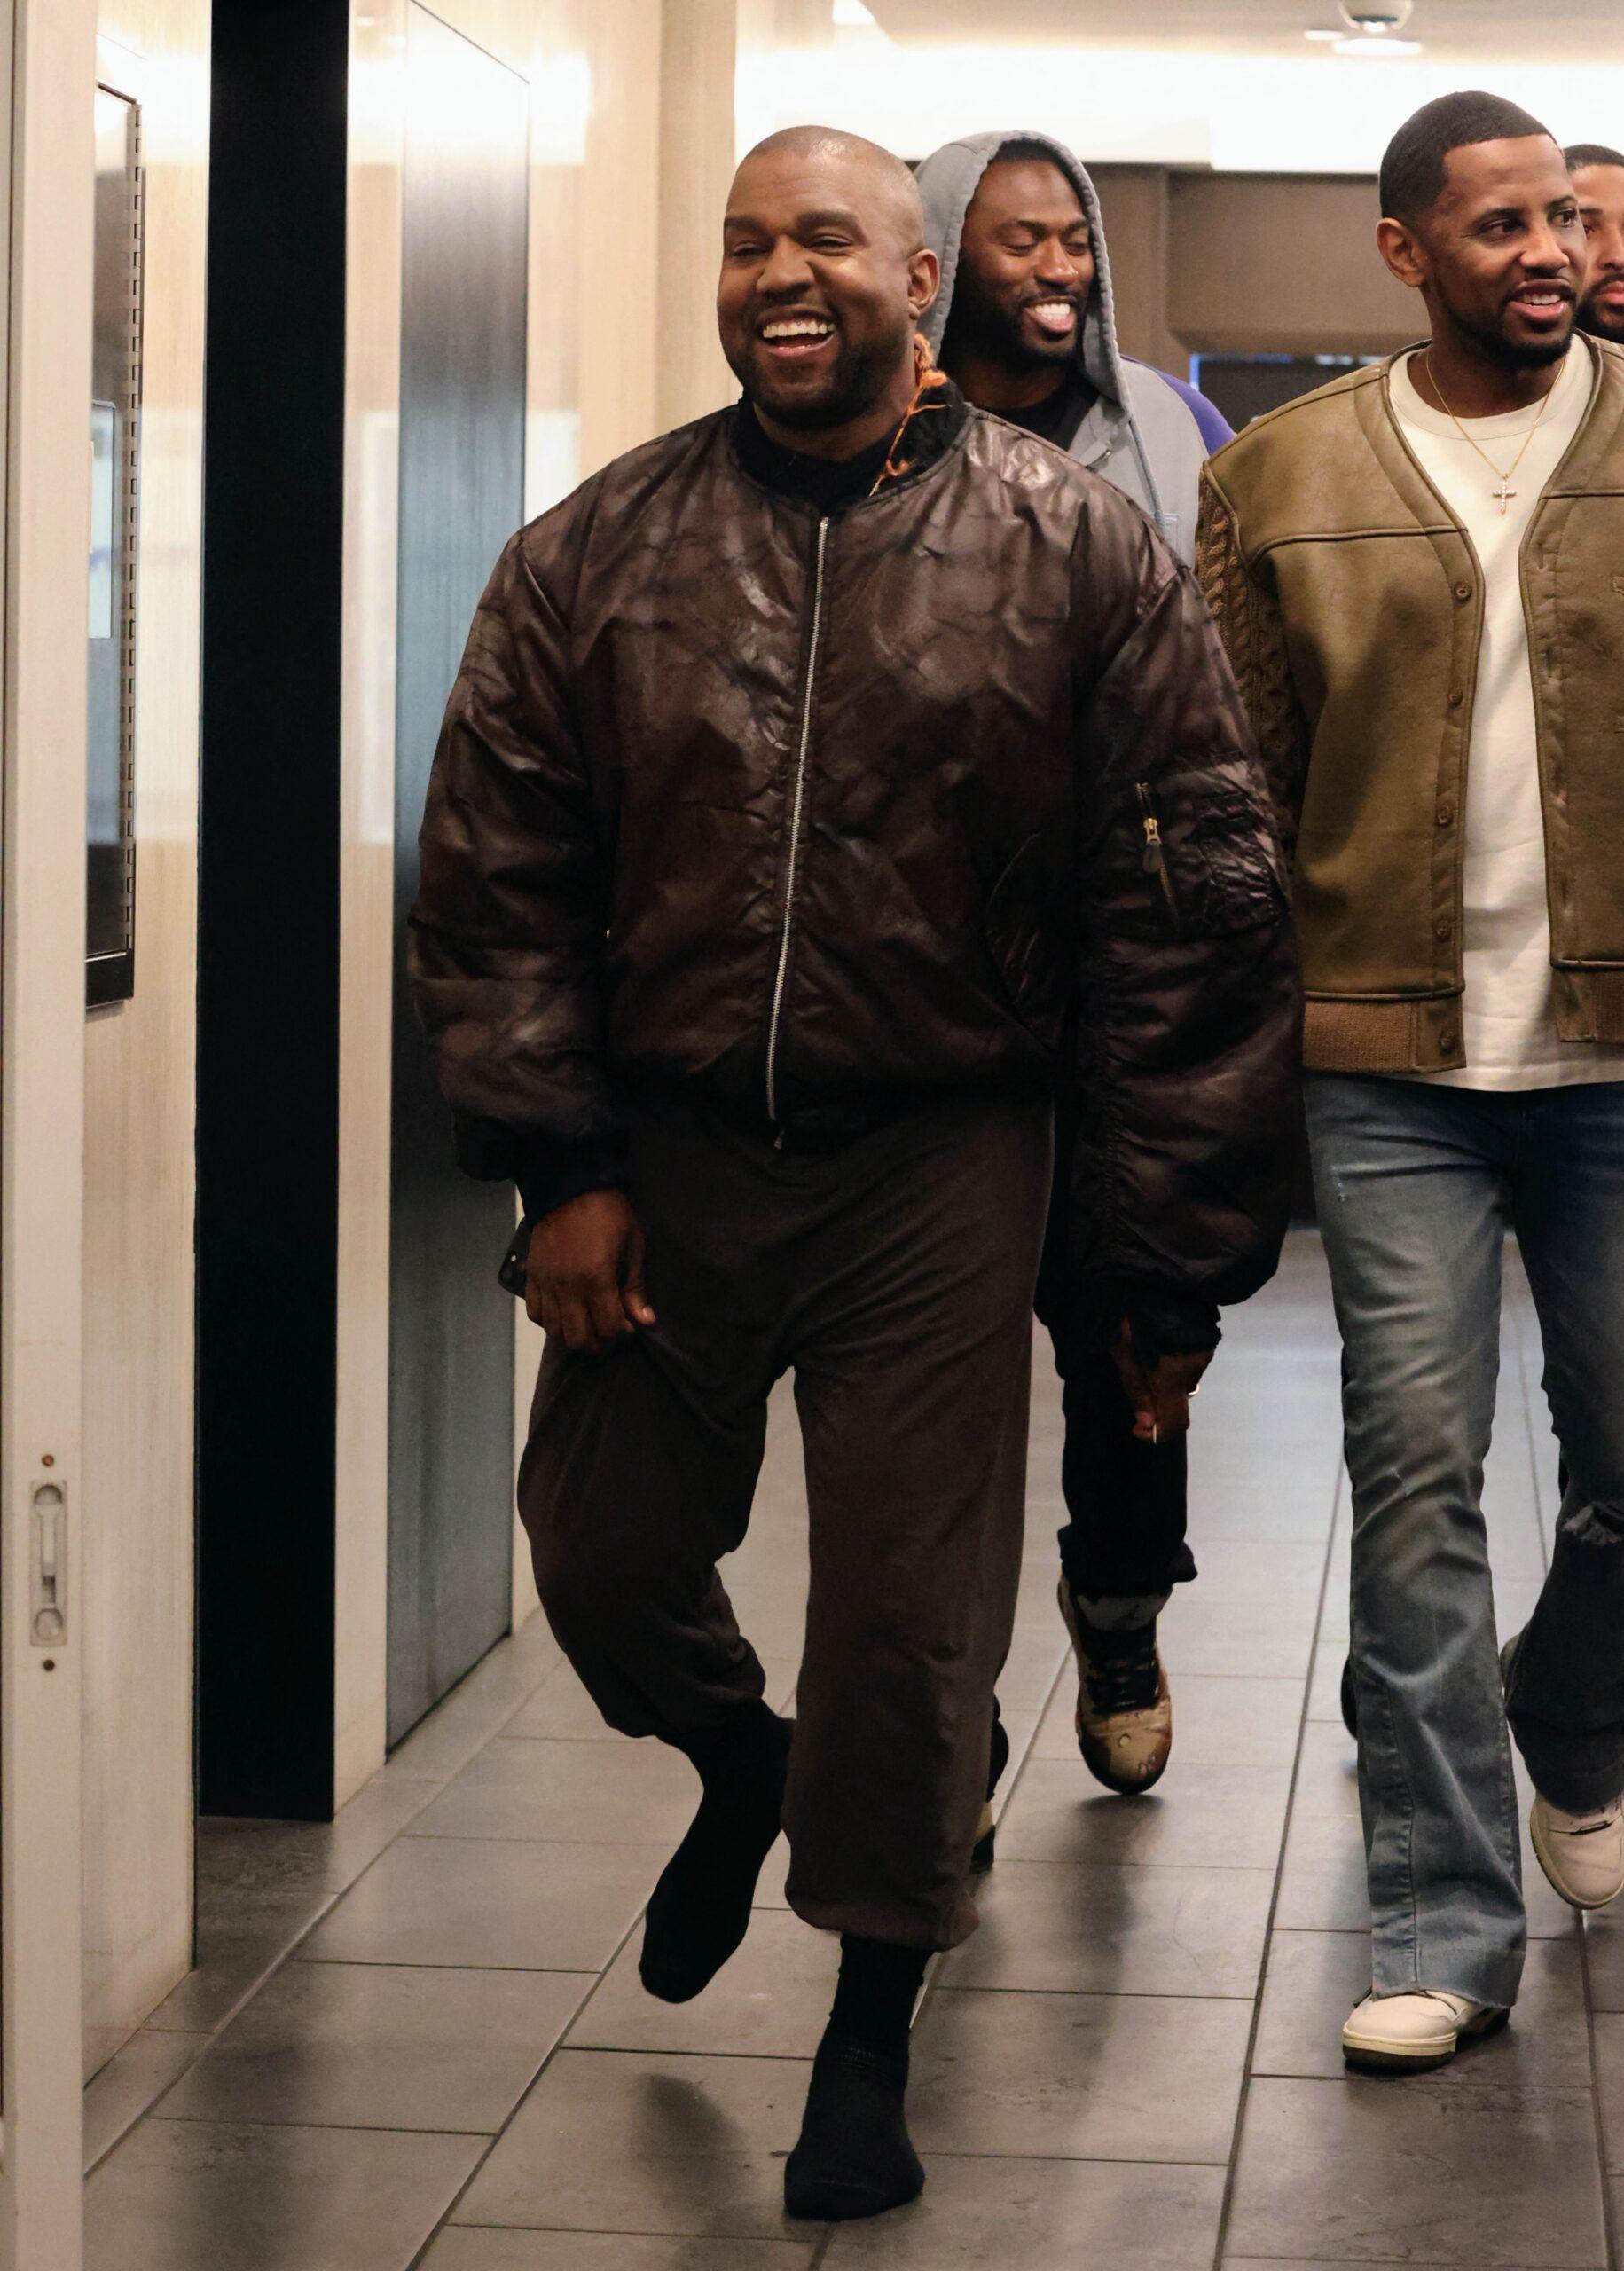 Kanye seen leaving e baldi restaurant all smiles after dining with friends